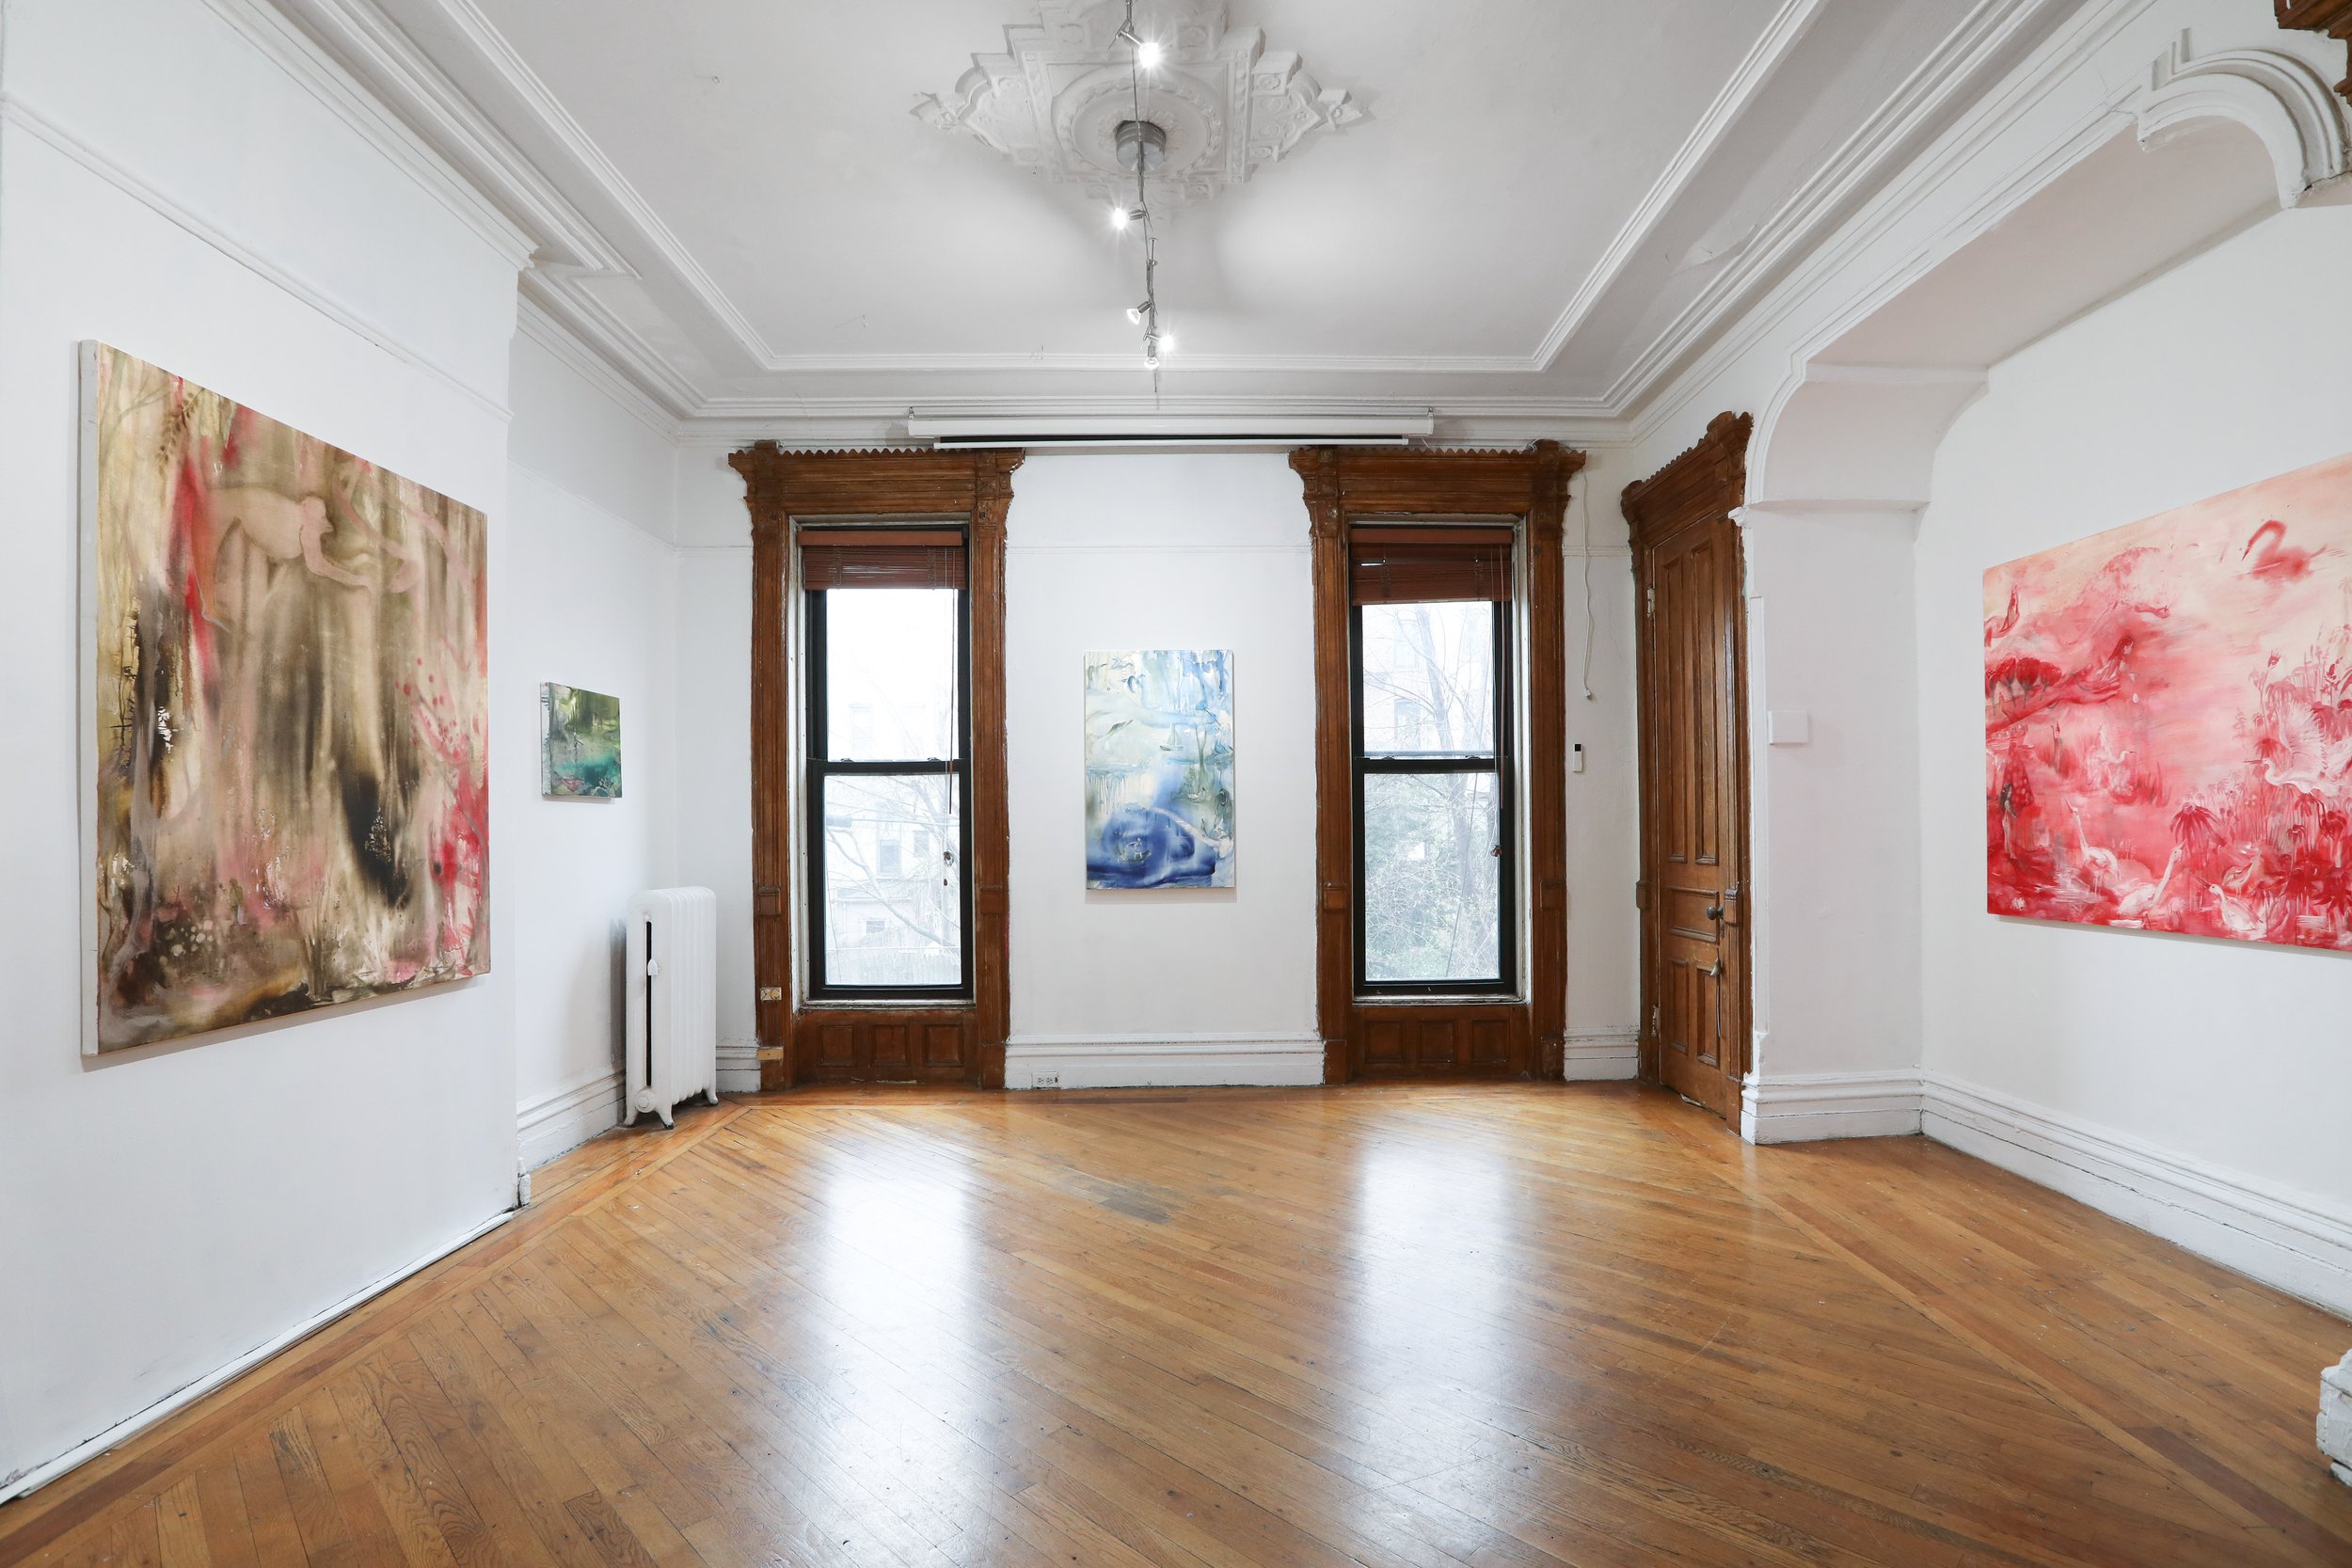  Installation view of  Saba Farhoudnia: Falling Petals, Standing Roses , photo by Ken Lee, courtesy of Fou Gallery 